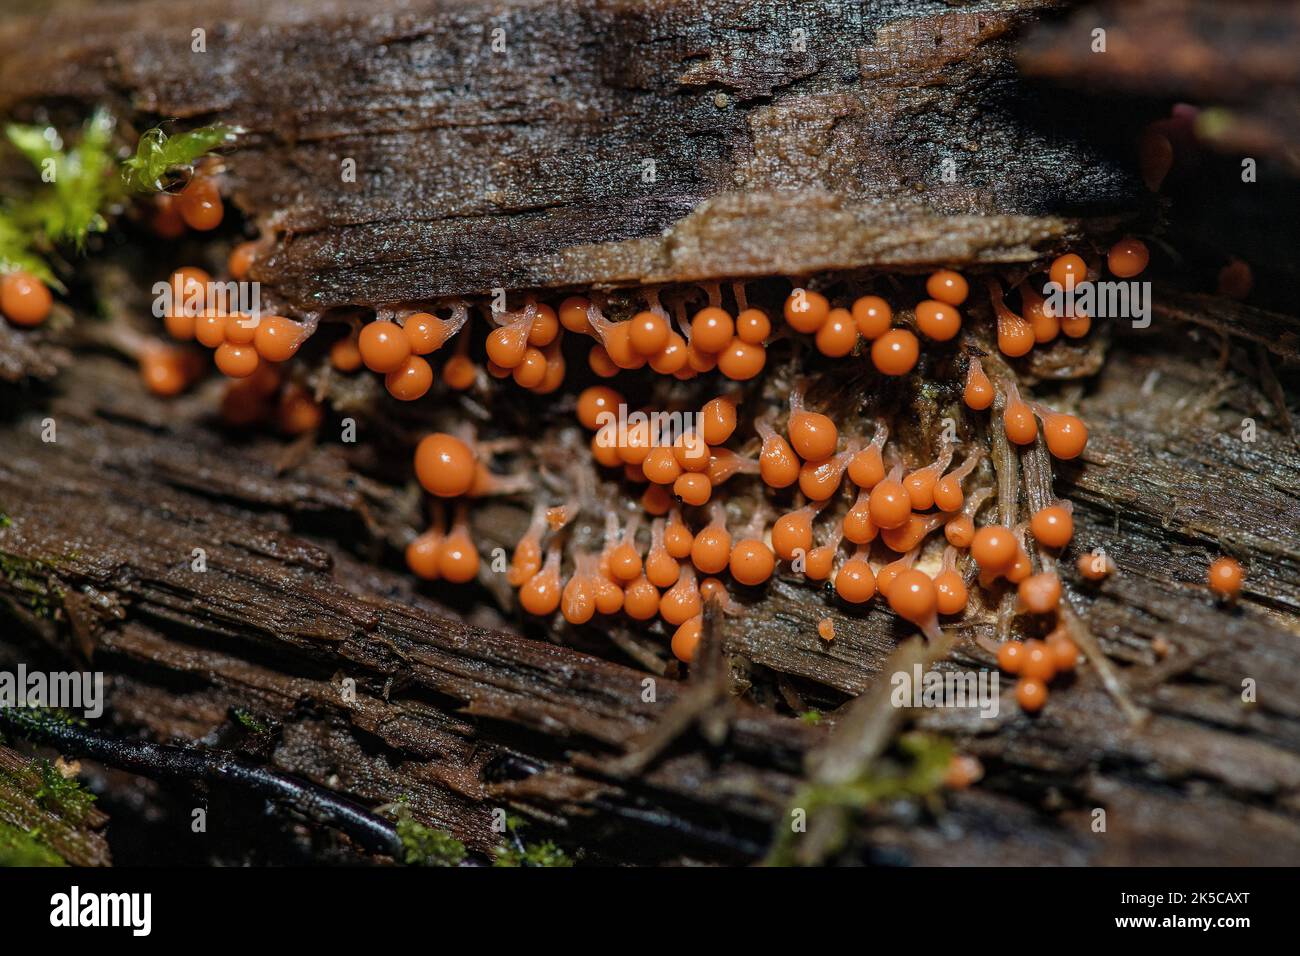 Plasmodium and sporangia of the slime mold Trichia sp. (probably T. decipiens) from Sande, Vestfold & Telemark, southern Norway in September. Stock Photo